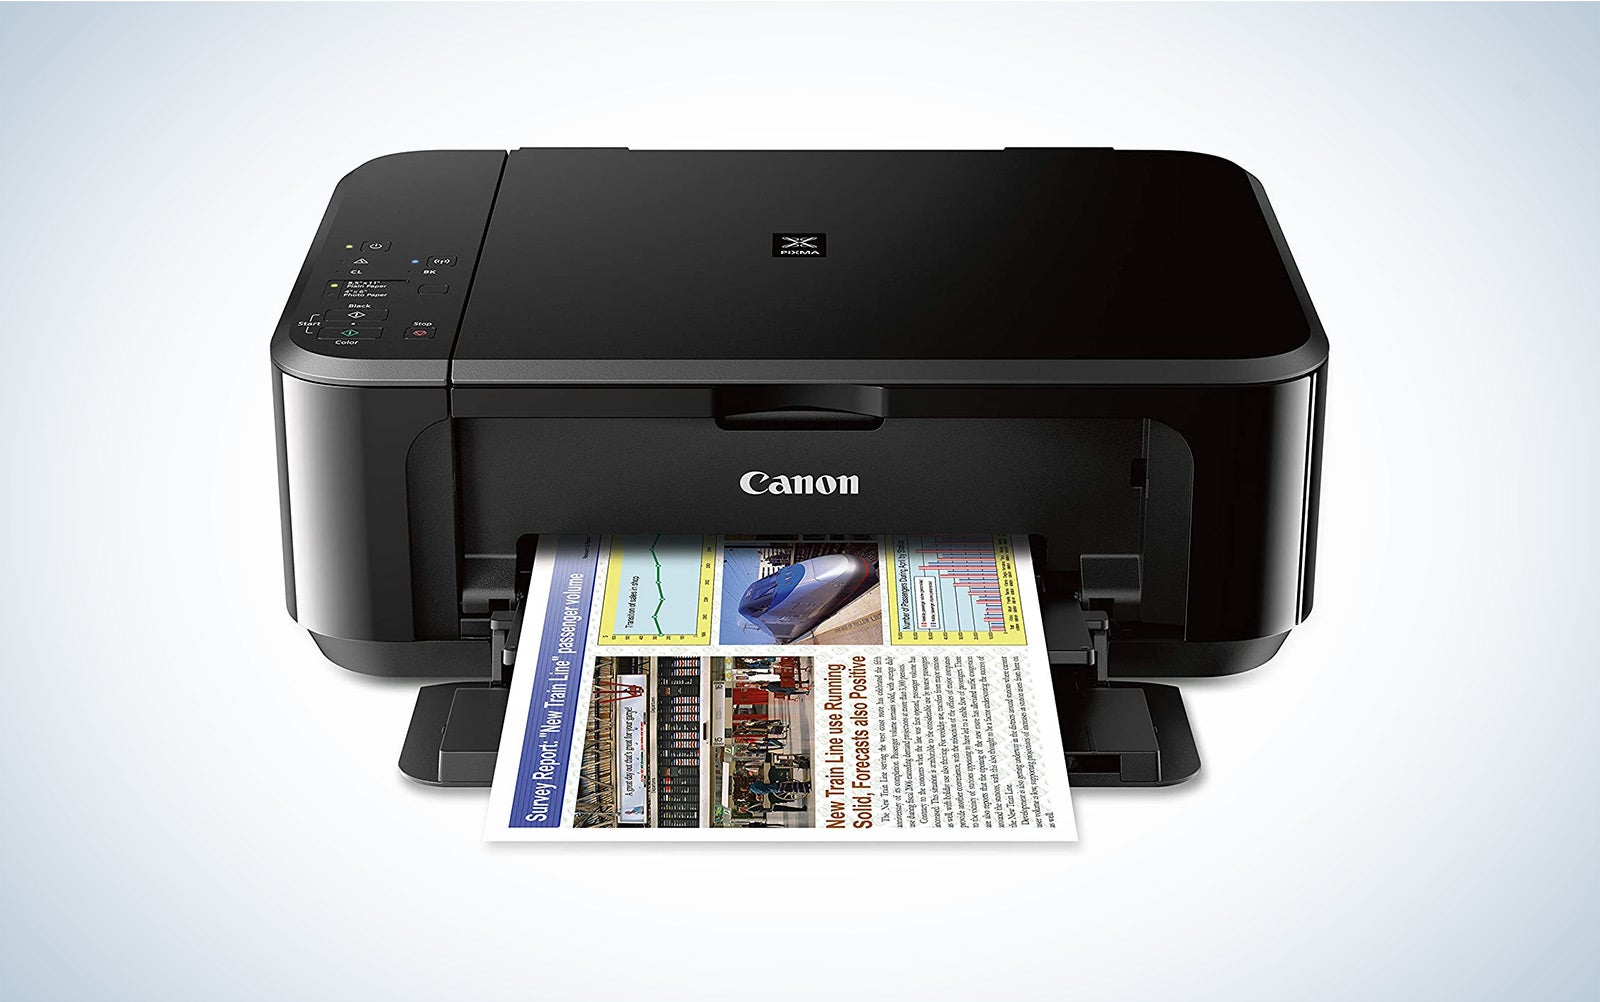 The Canon Pixma MG3620 is the best cheap printer.